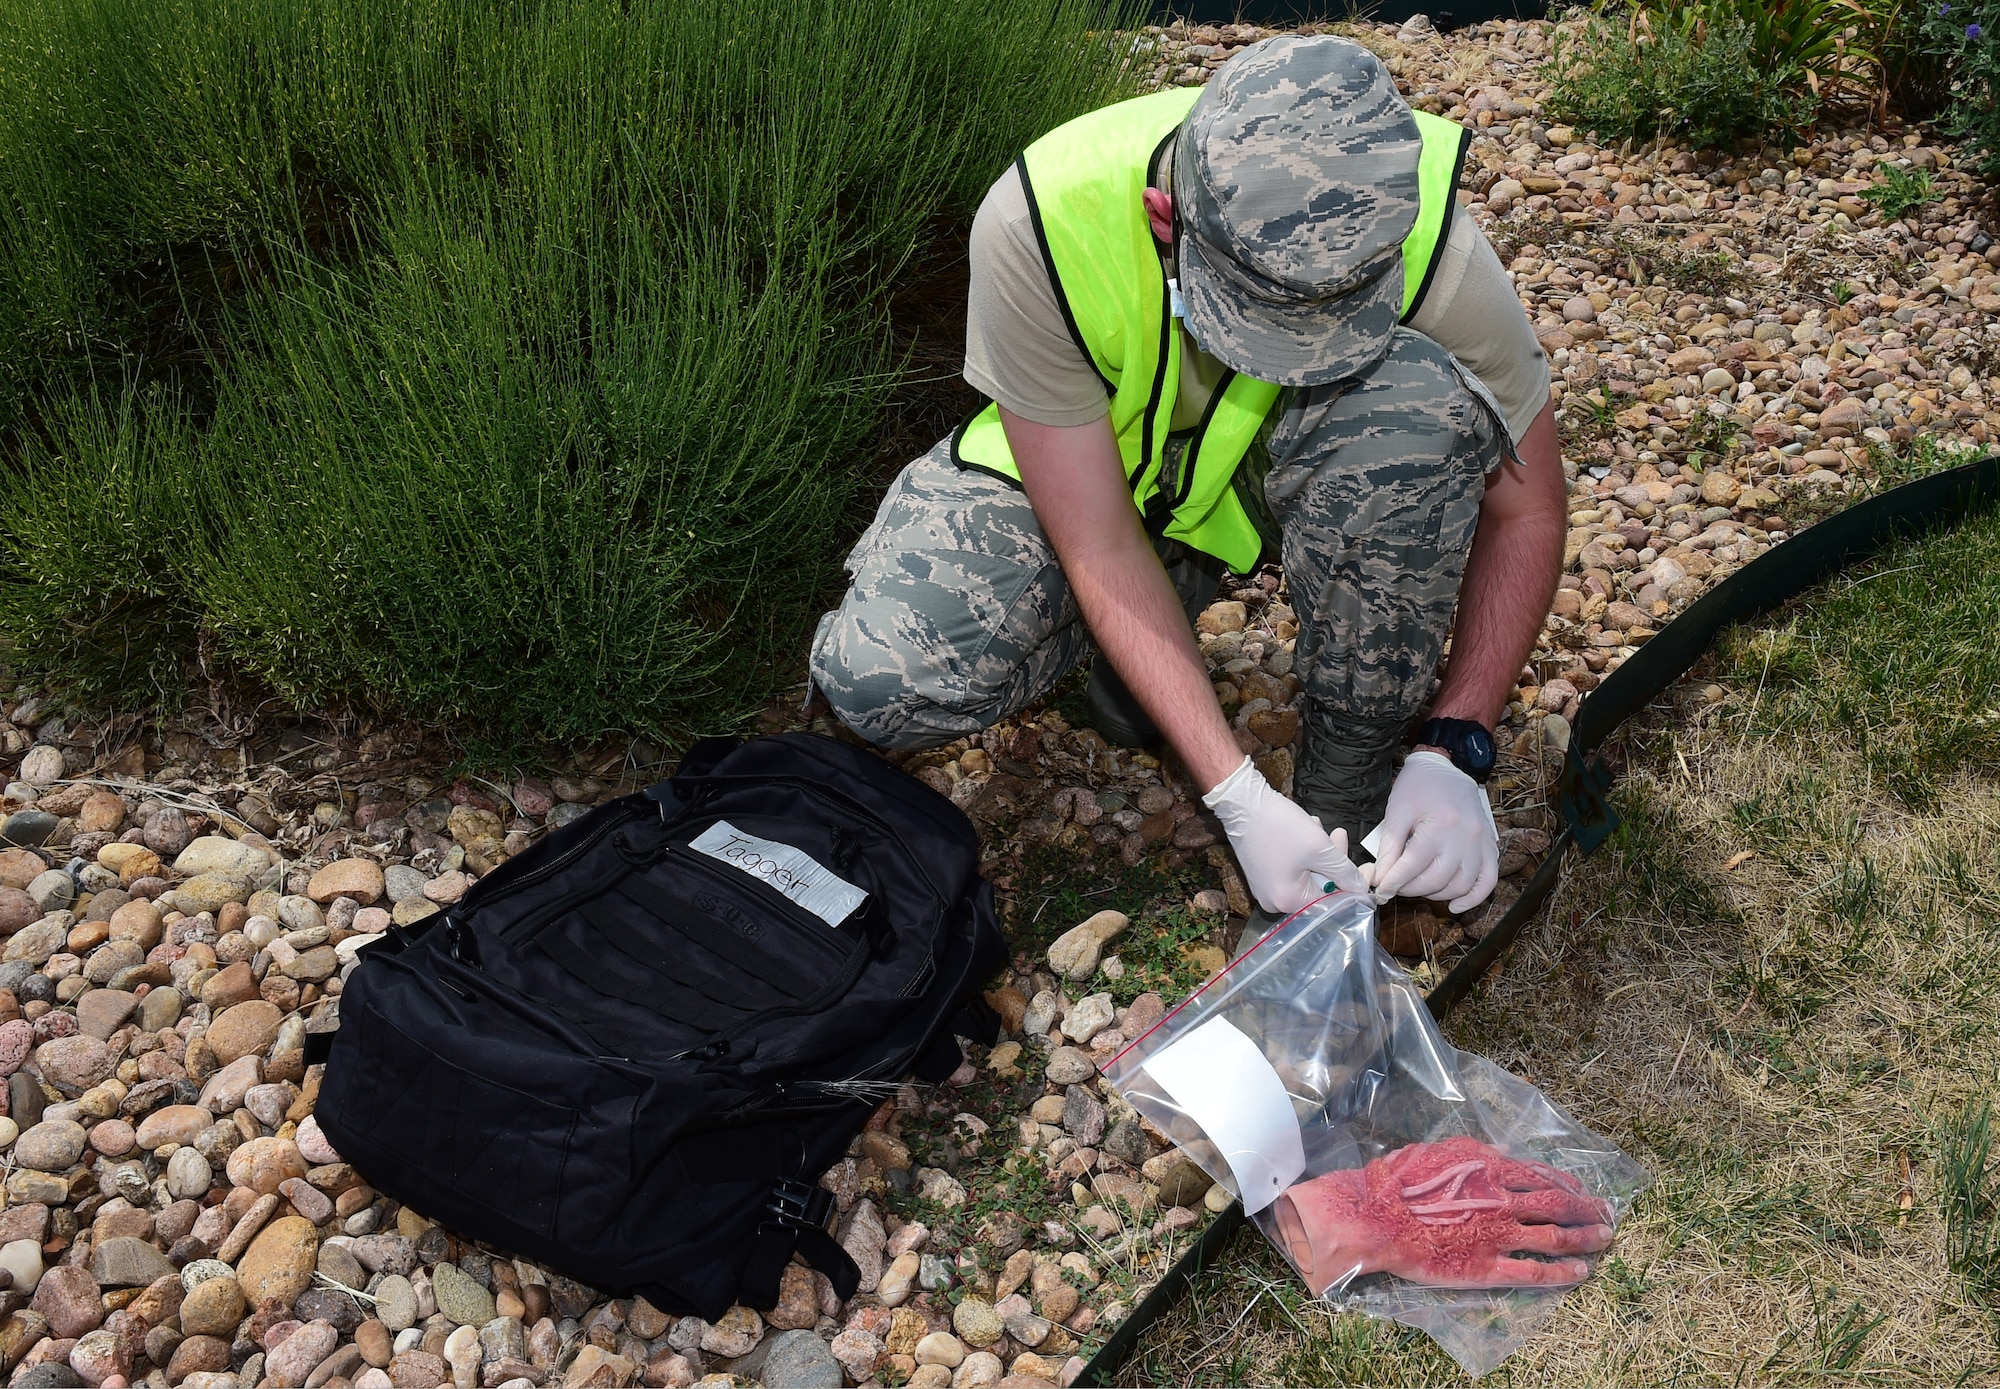 An Airman from the 460th Force Support Squadron simulates tagging a human hand as part of search and recovery training on July 19, 2018 on Buckley Air Force Base, Colorado. The training ensures Airmen are prepared for crisis response situations. (U.S. Air Force photo by Senior Airman AJ Duprey)